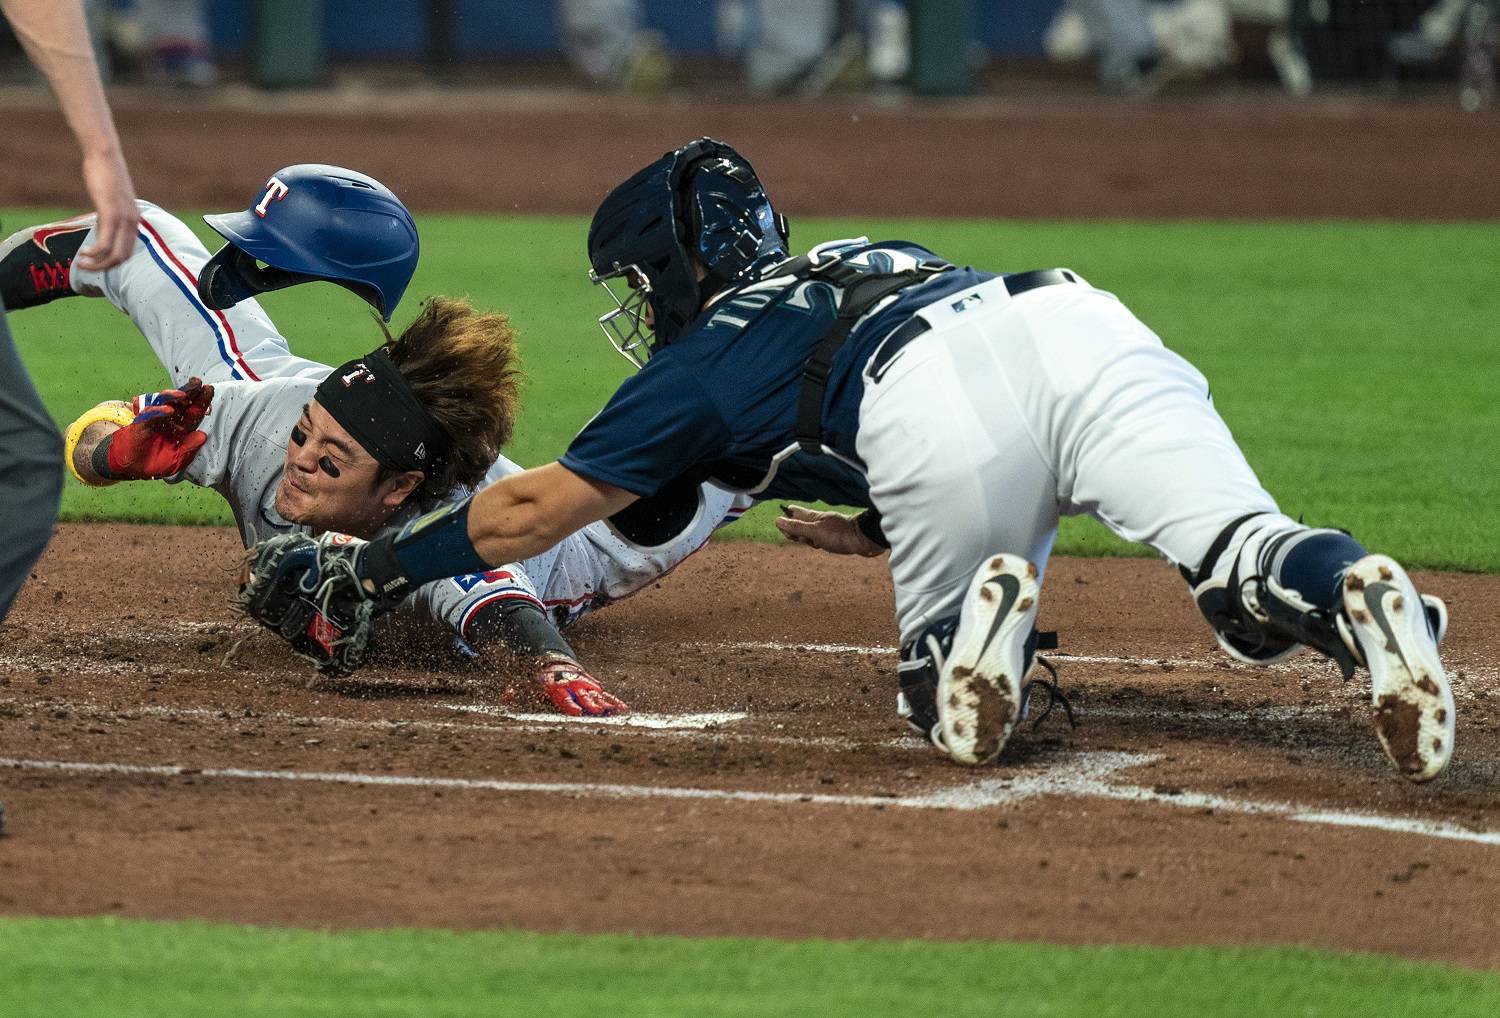 The Texas Rangers’ Shin-Soo Choo, left, touches home plate to score before Seattle Mariners catcher Luis Torrens, right, can make a tag on a two-run double by Rangers’ Joey Gallo off Mariners starting pitcher Marco Gonzales during the fourth inning Monday in Seattle. (Stephen Brashear/Associated Press)